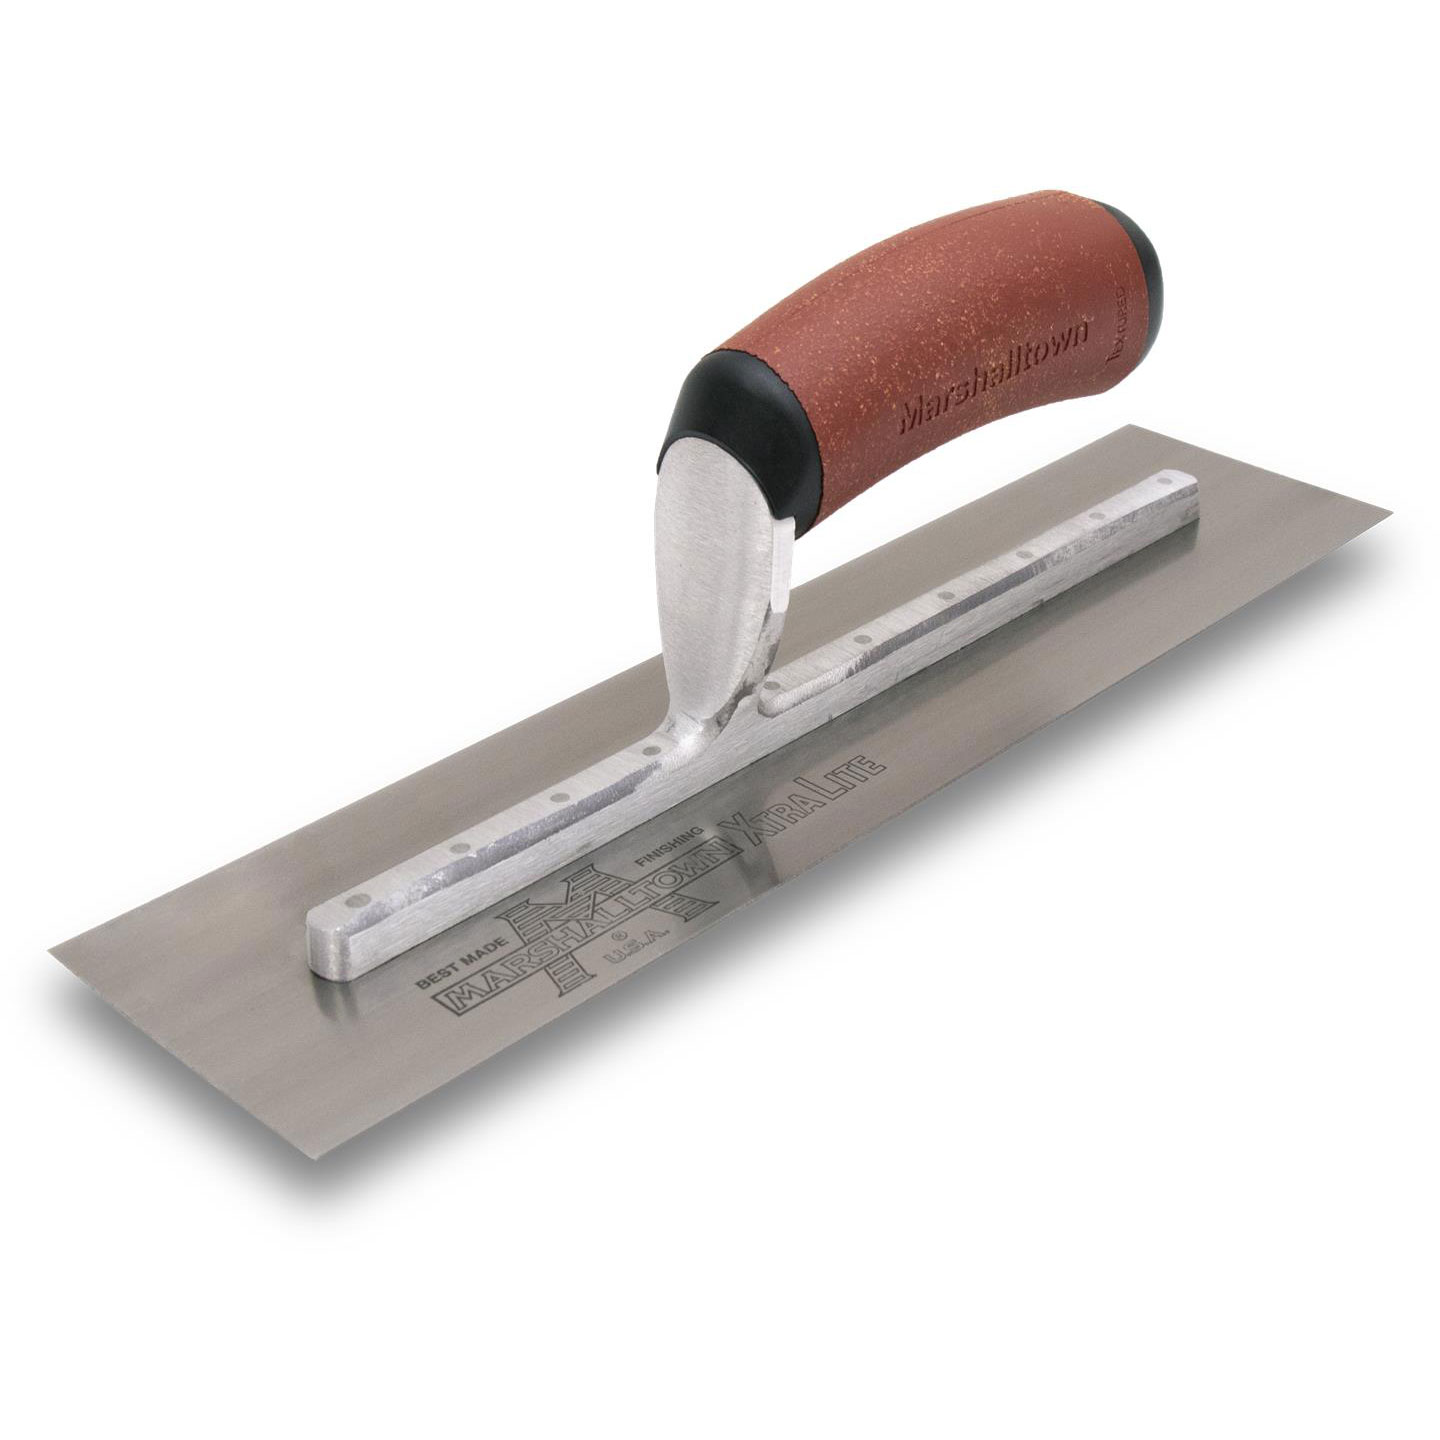 Marshalltown MXS62DC 12in x 4in Finishing Trowel with DuraCork Handle MXS62DC